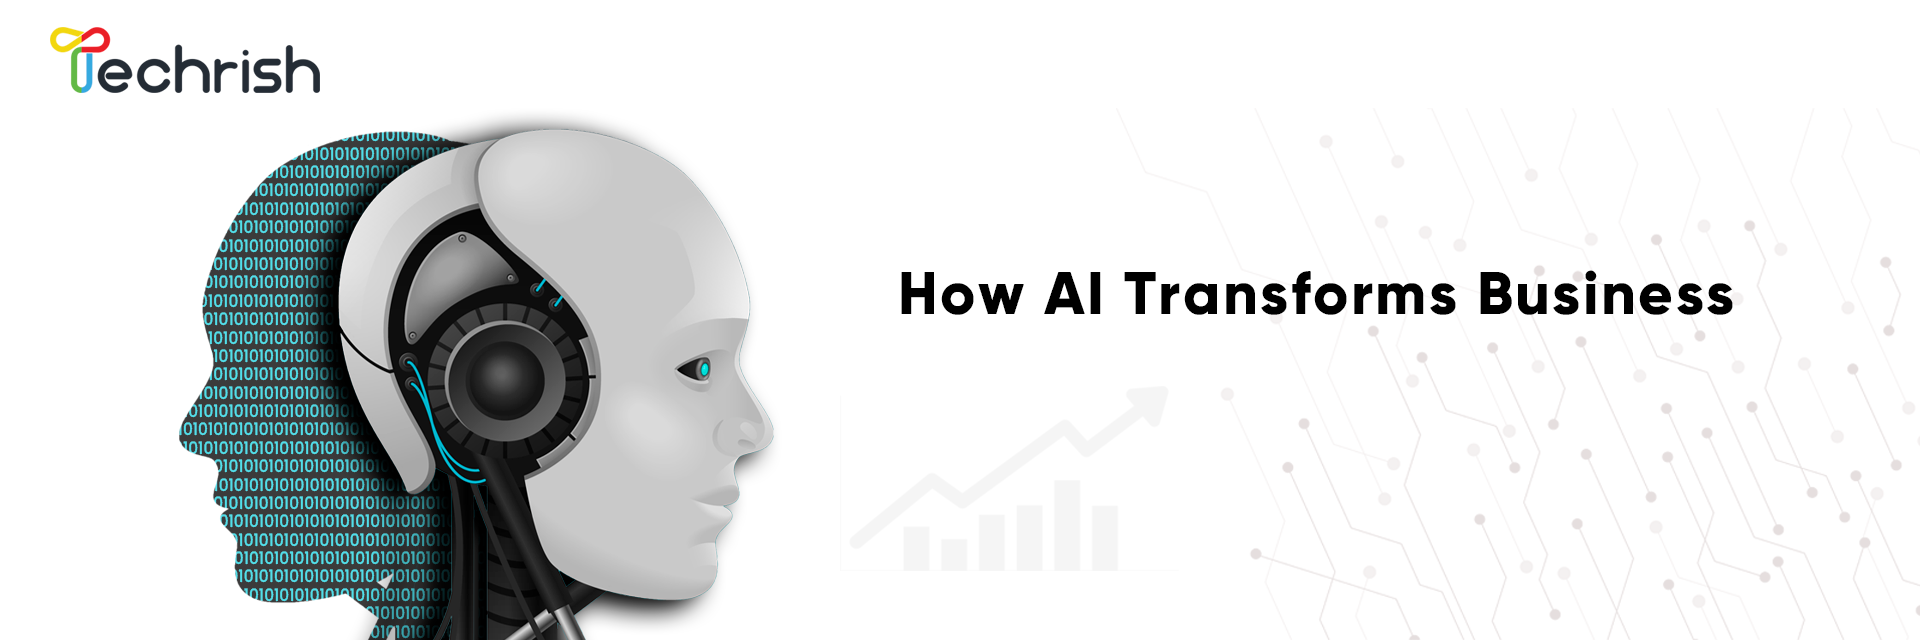 How Artificial intelligence (AI) Transforms Business